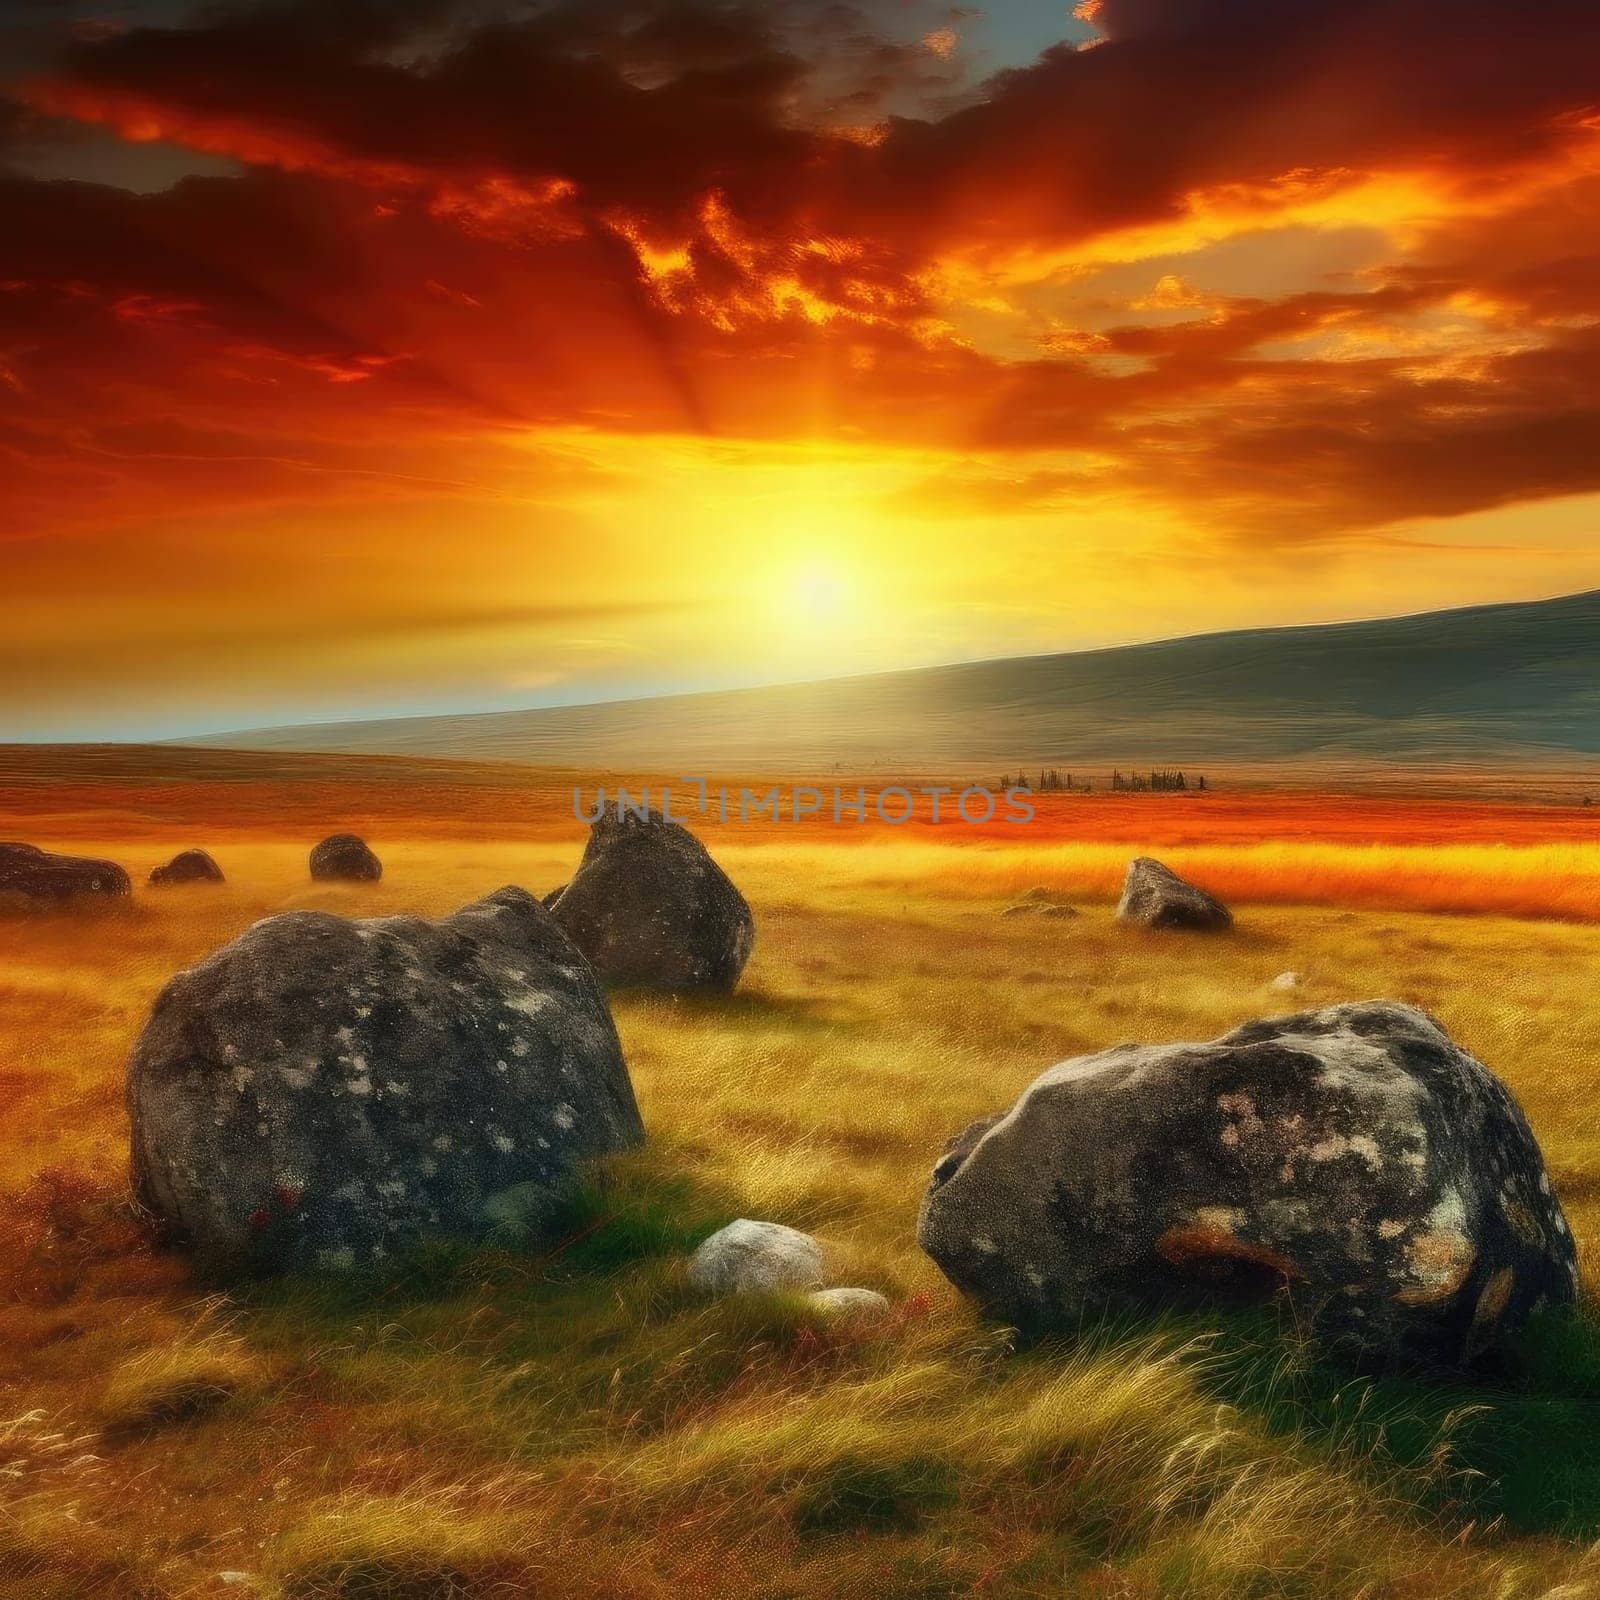 Beautiful sunset over the meadow with stones - digital painting (ID: 001340)